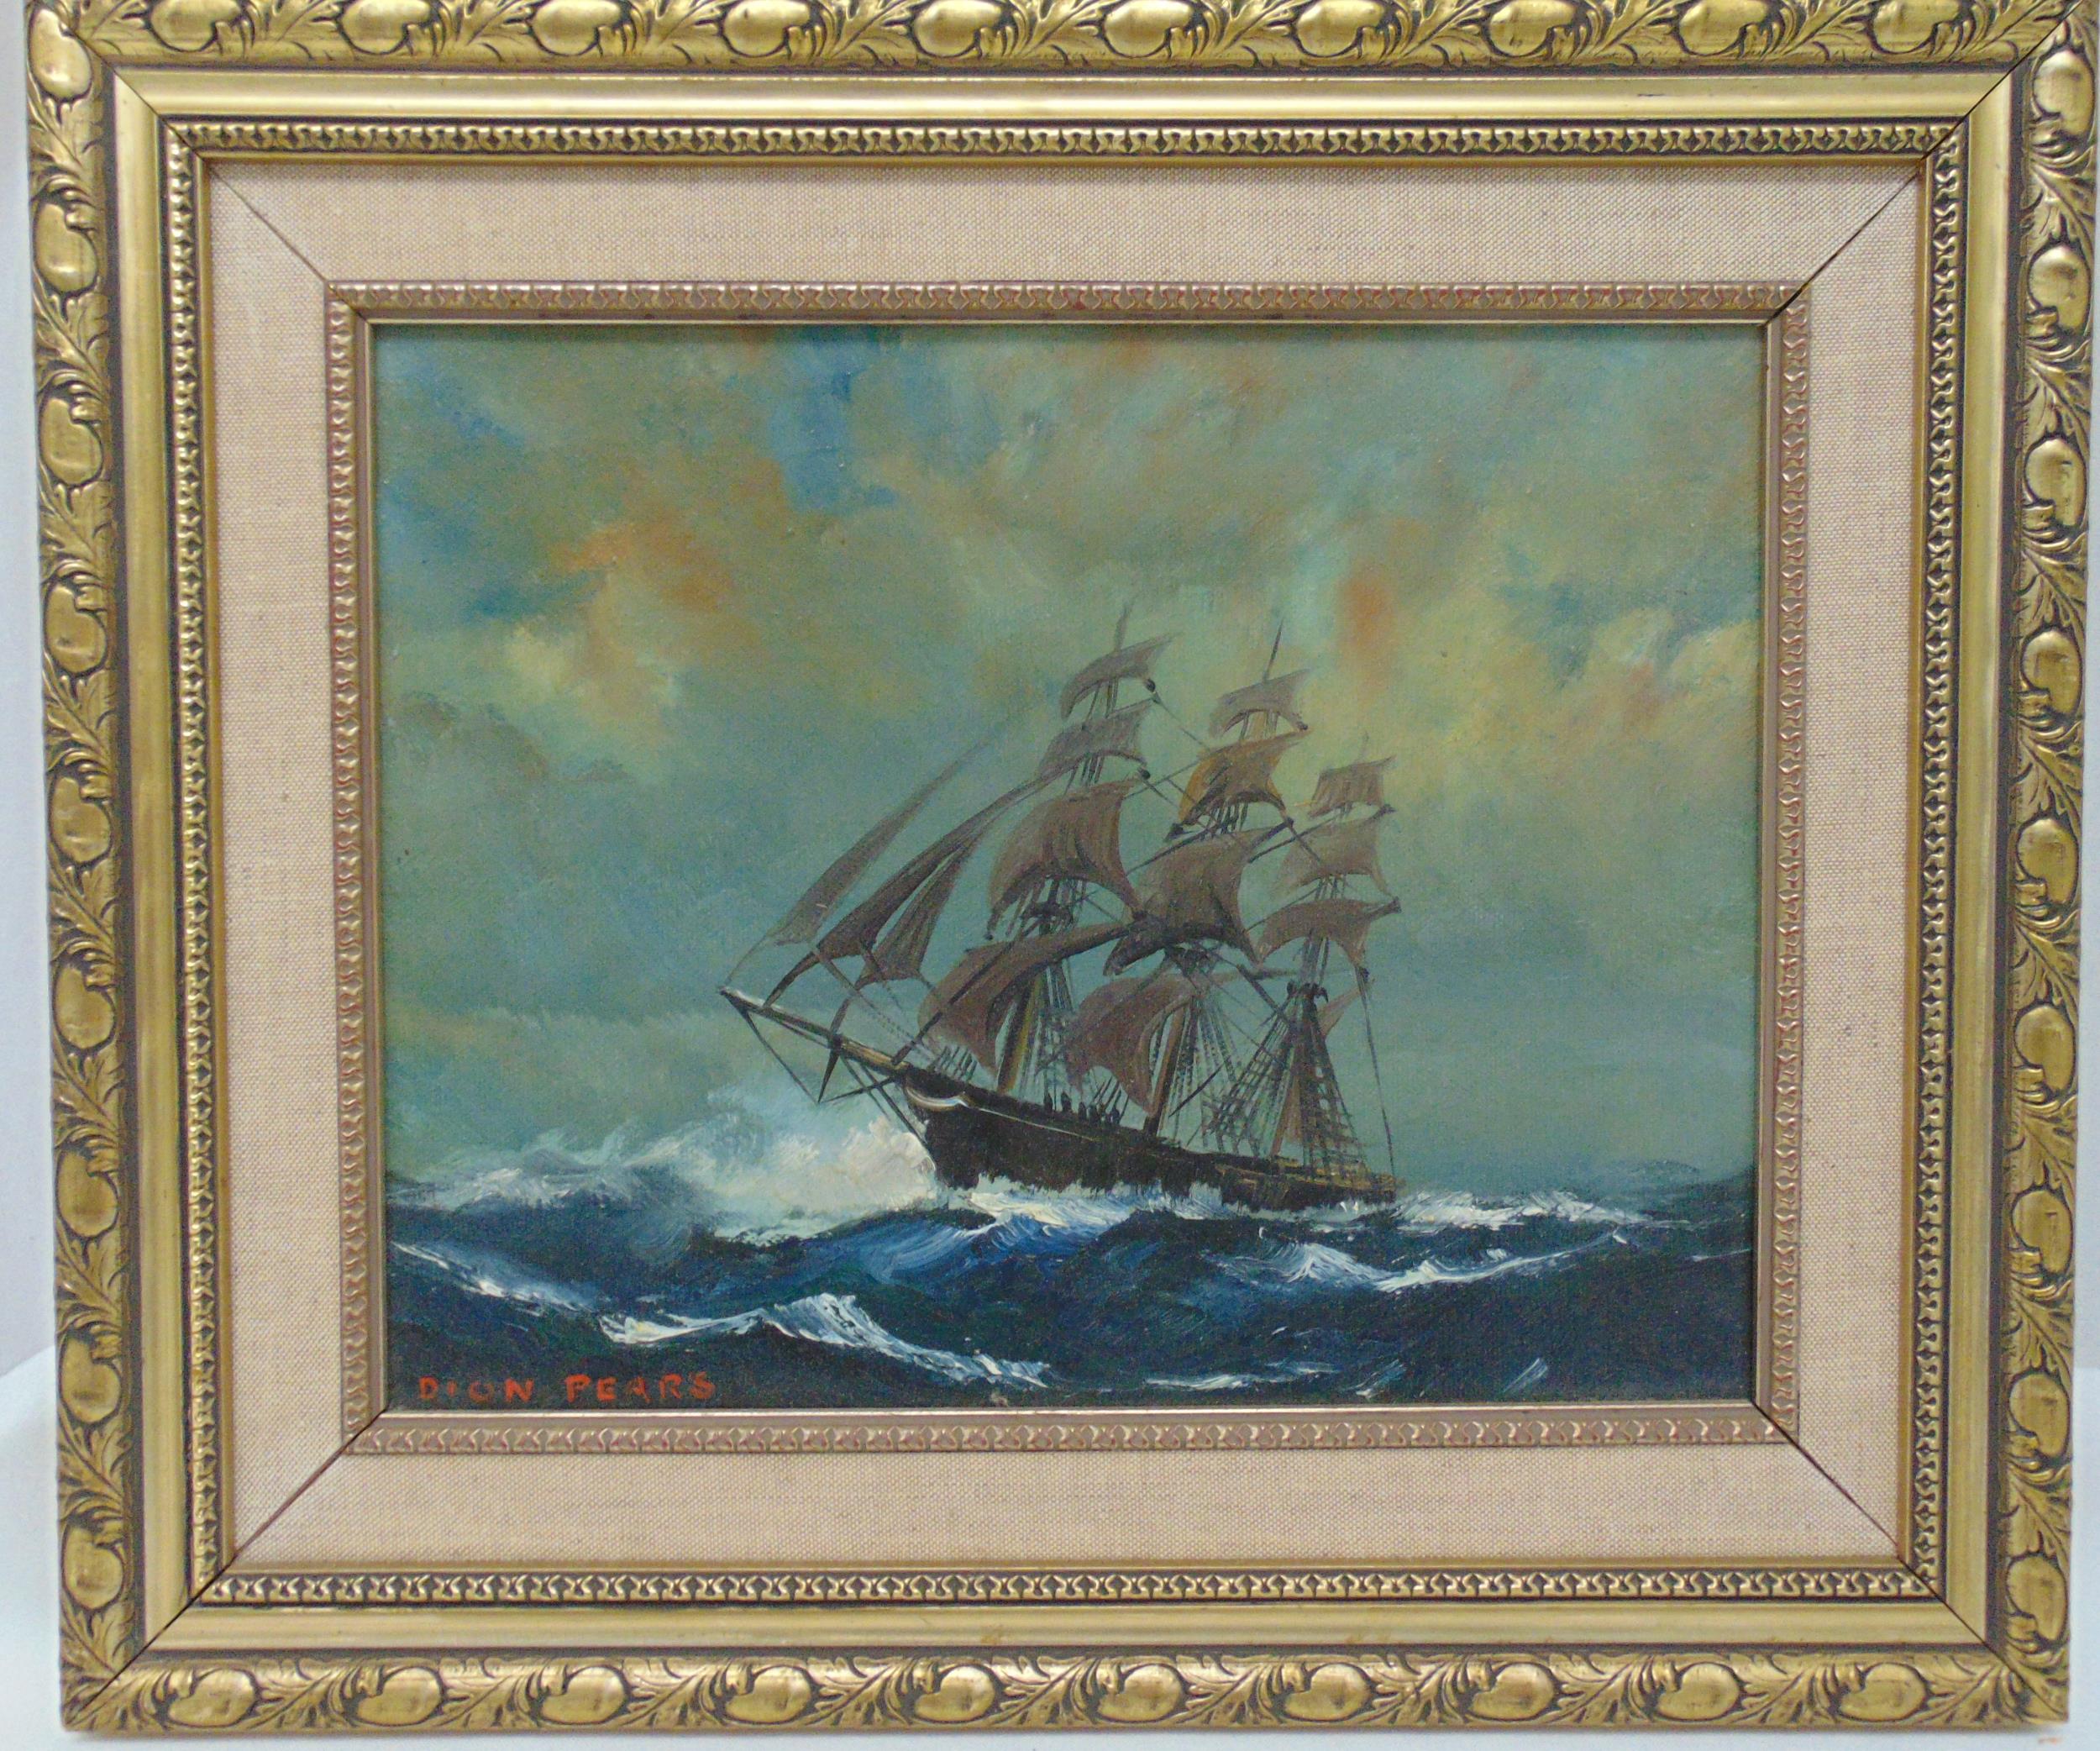 Dion Pears framed oil on panel of a sailing ship in rough seas, signed bottom left, 23 x 29cm